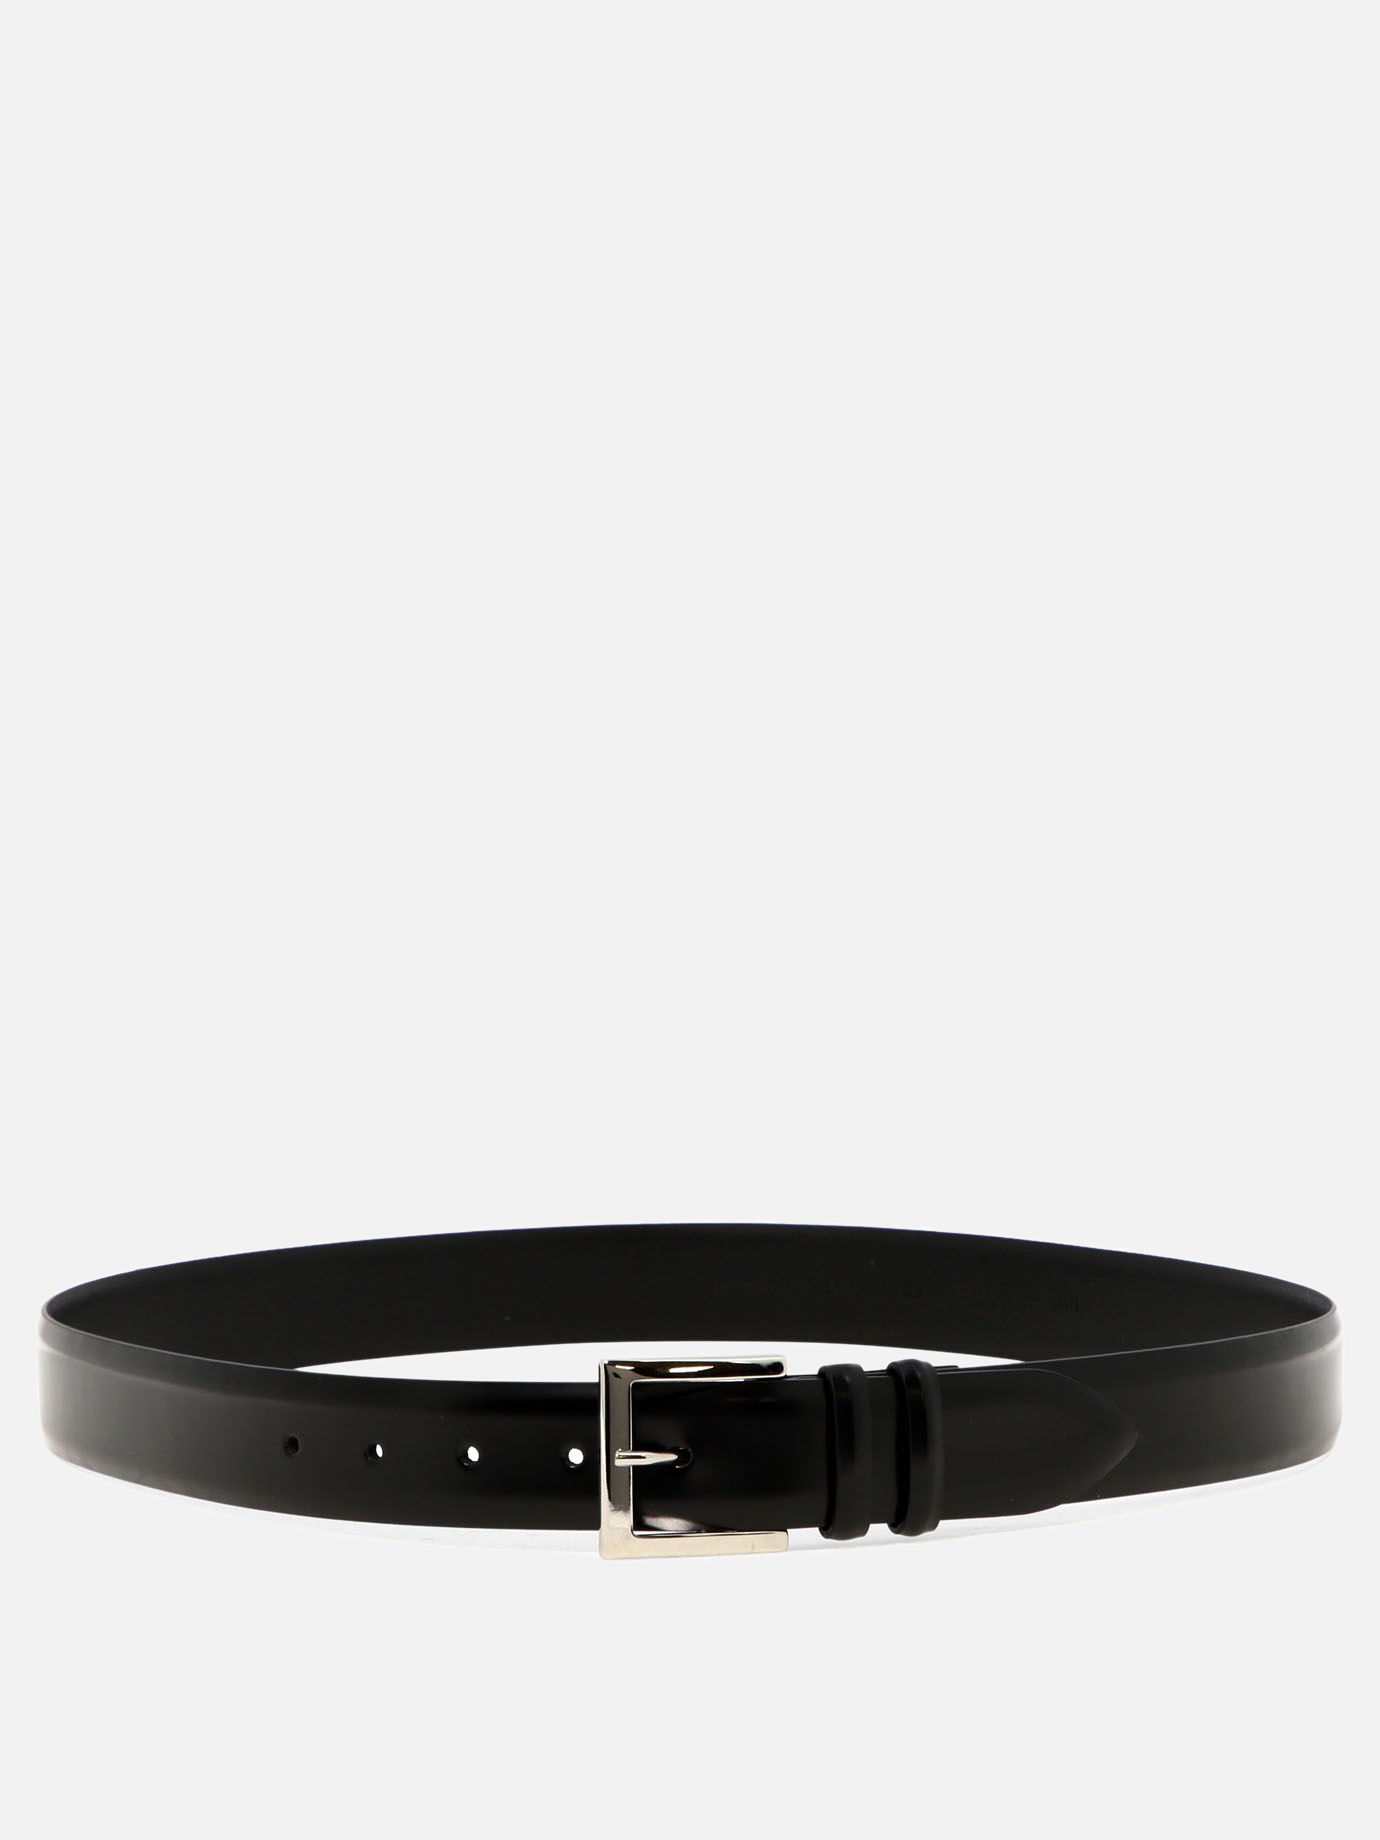 Leather belt by Orciani